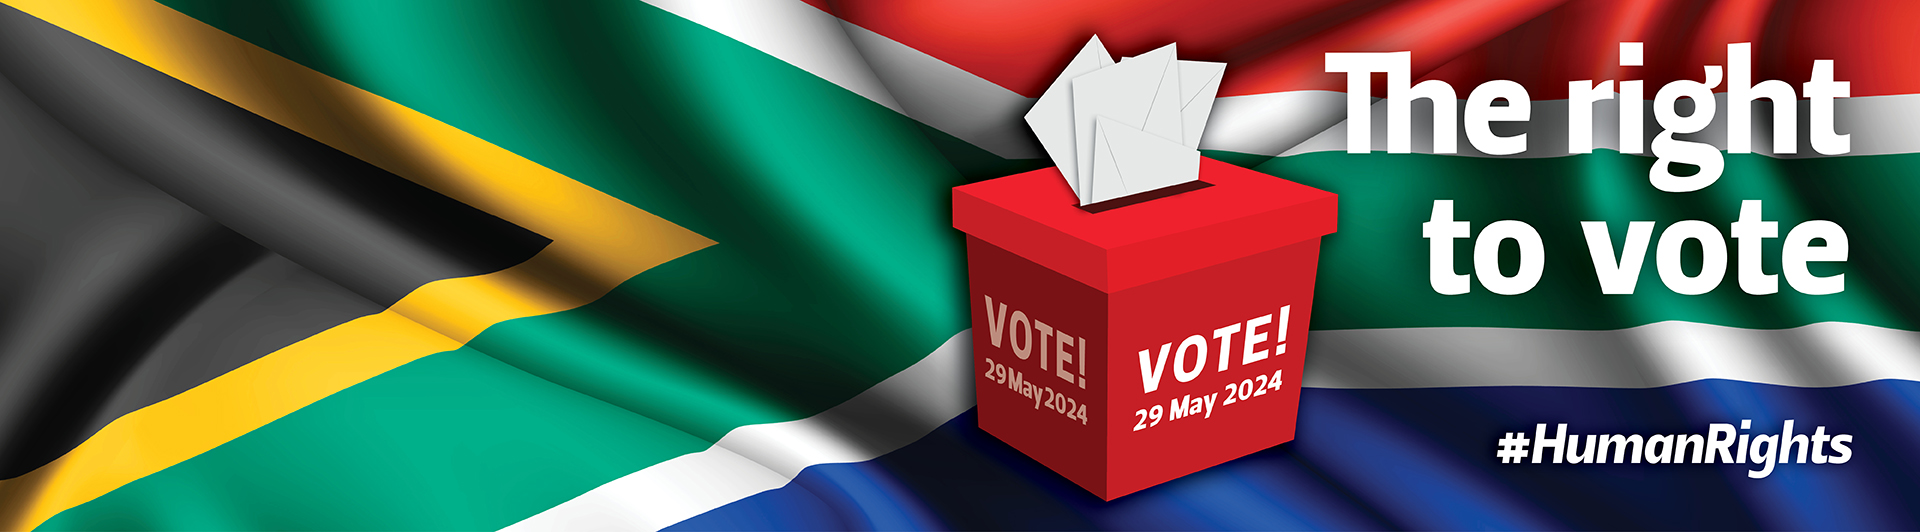 Right to Vote - SA Elections